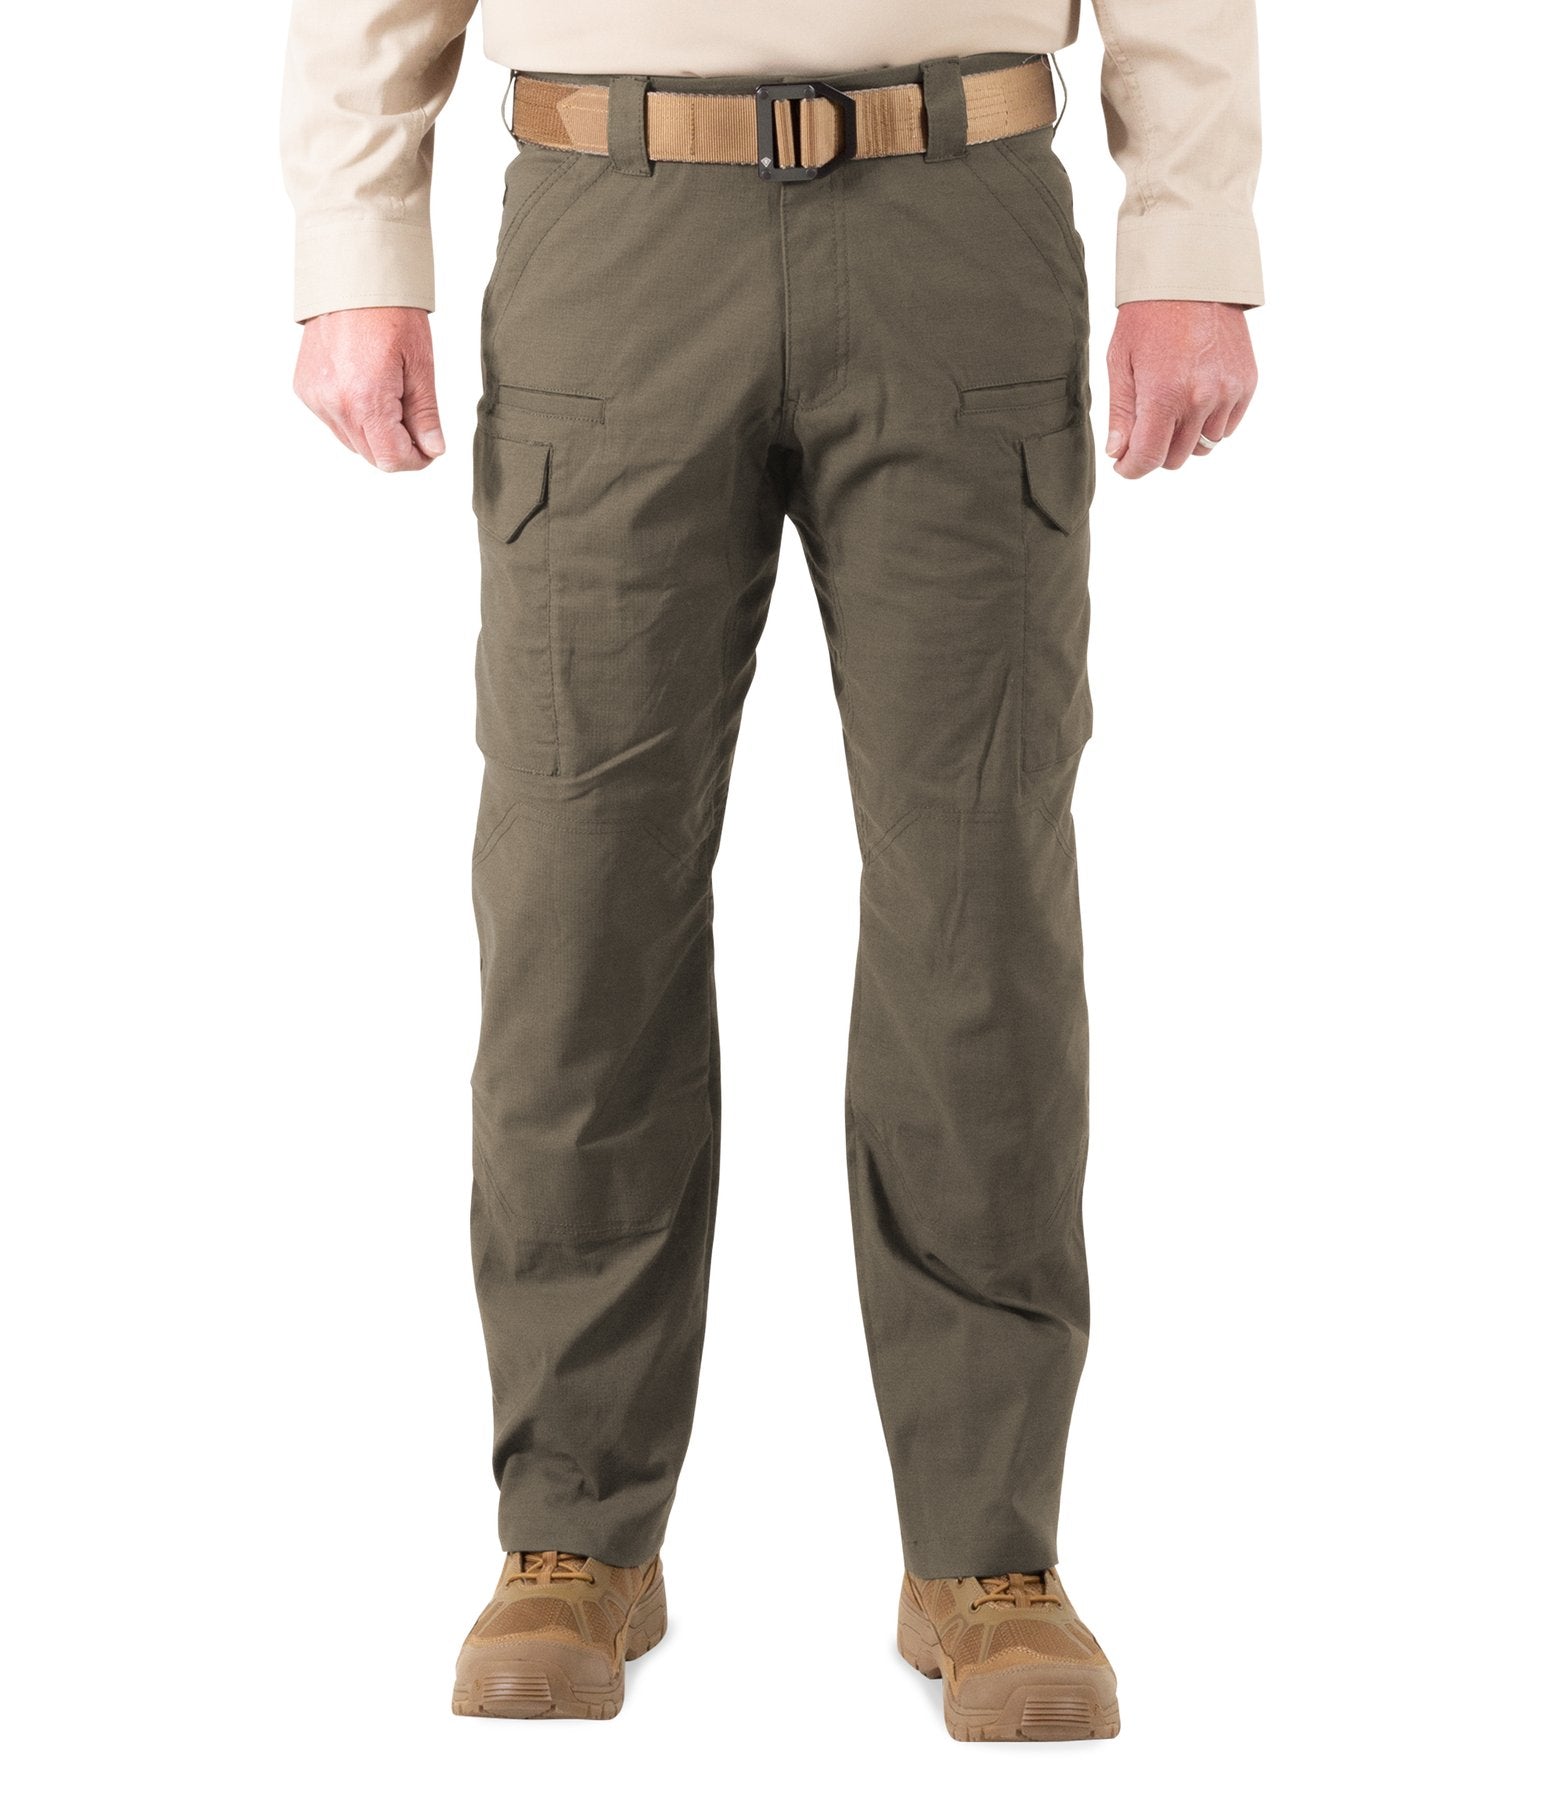 First Tactical® Defender Pants